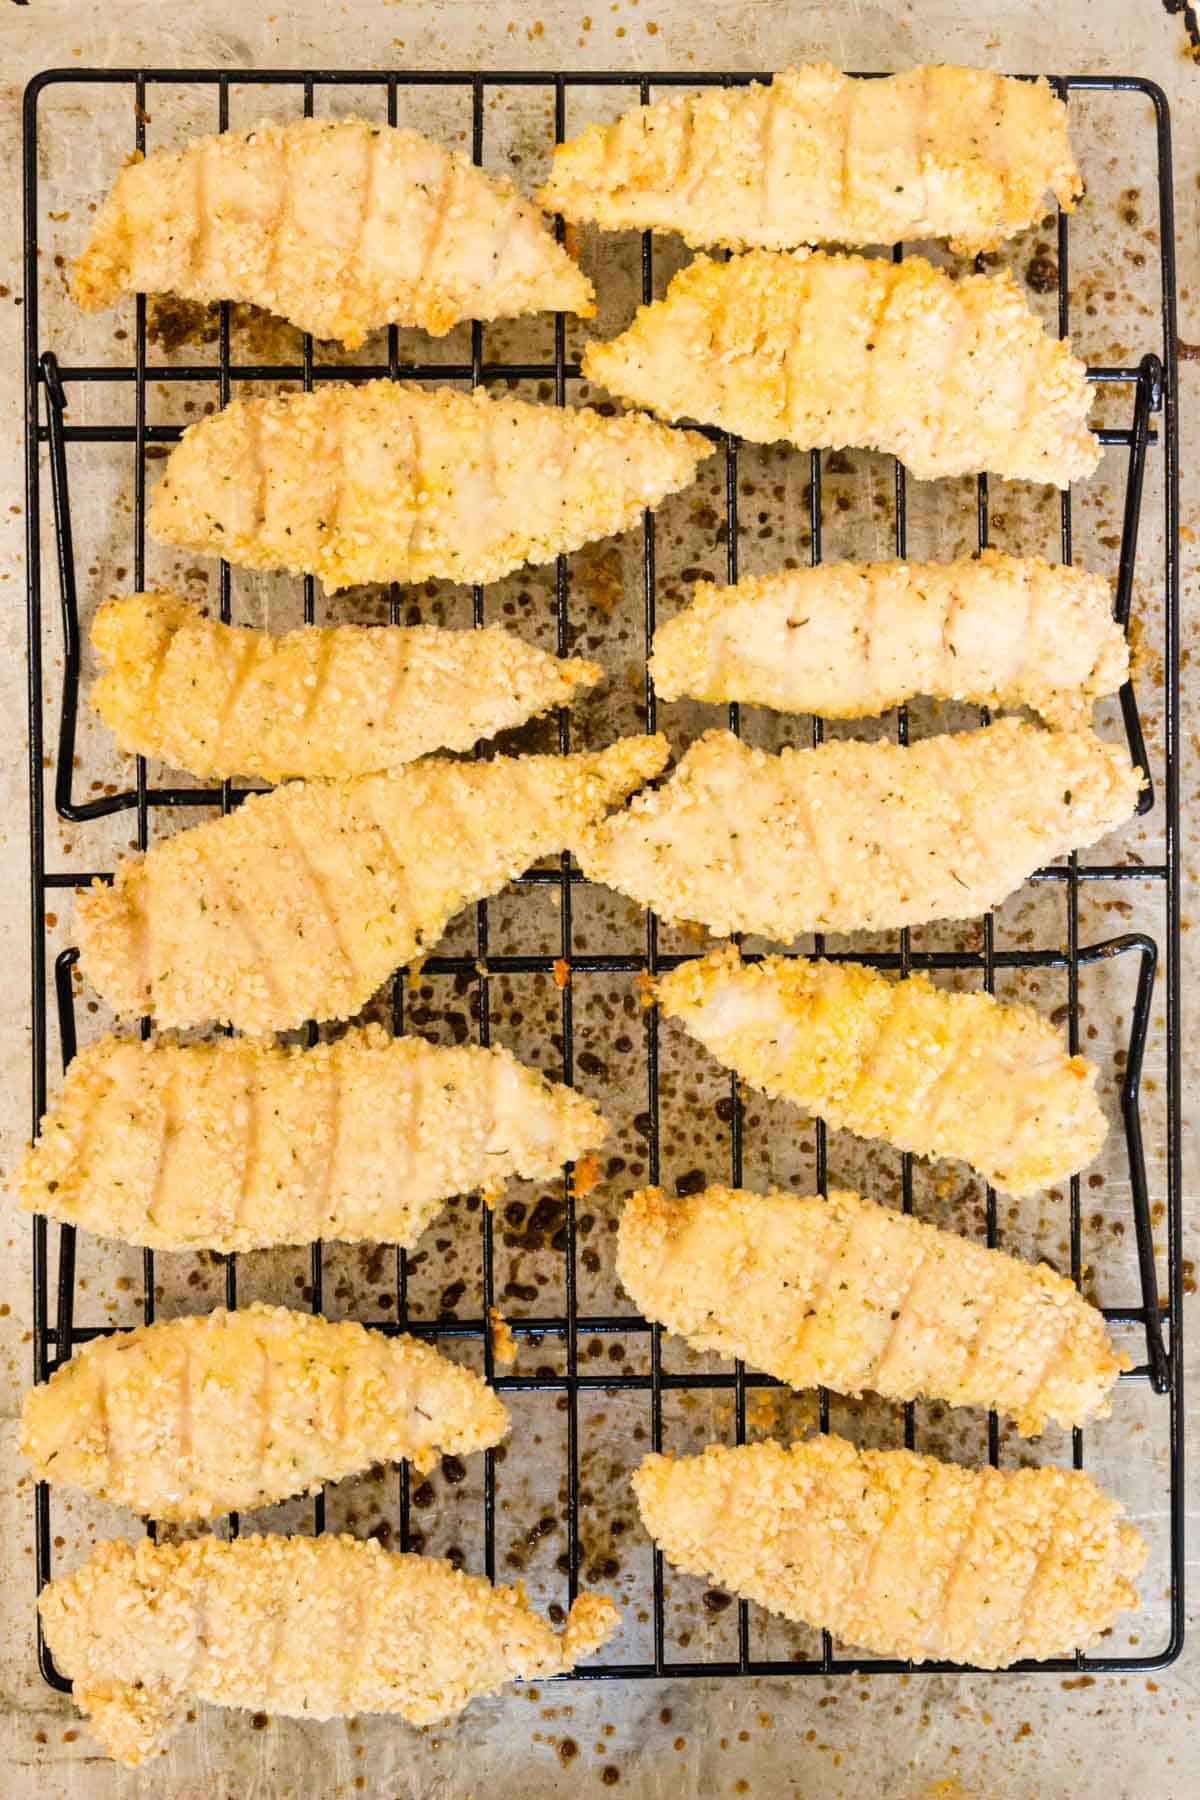 Top view of baked chicken tenders in rows on a wire rack on top of a baking sheet.